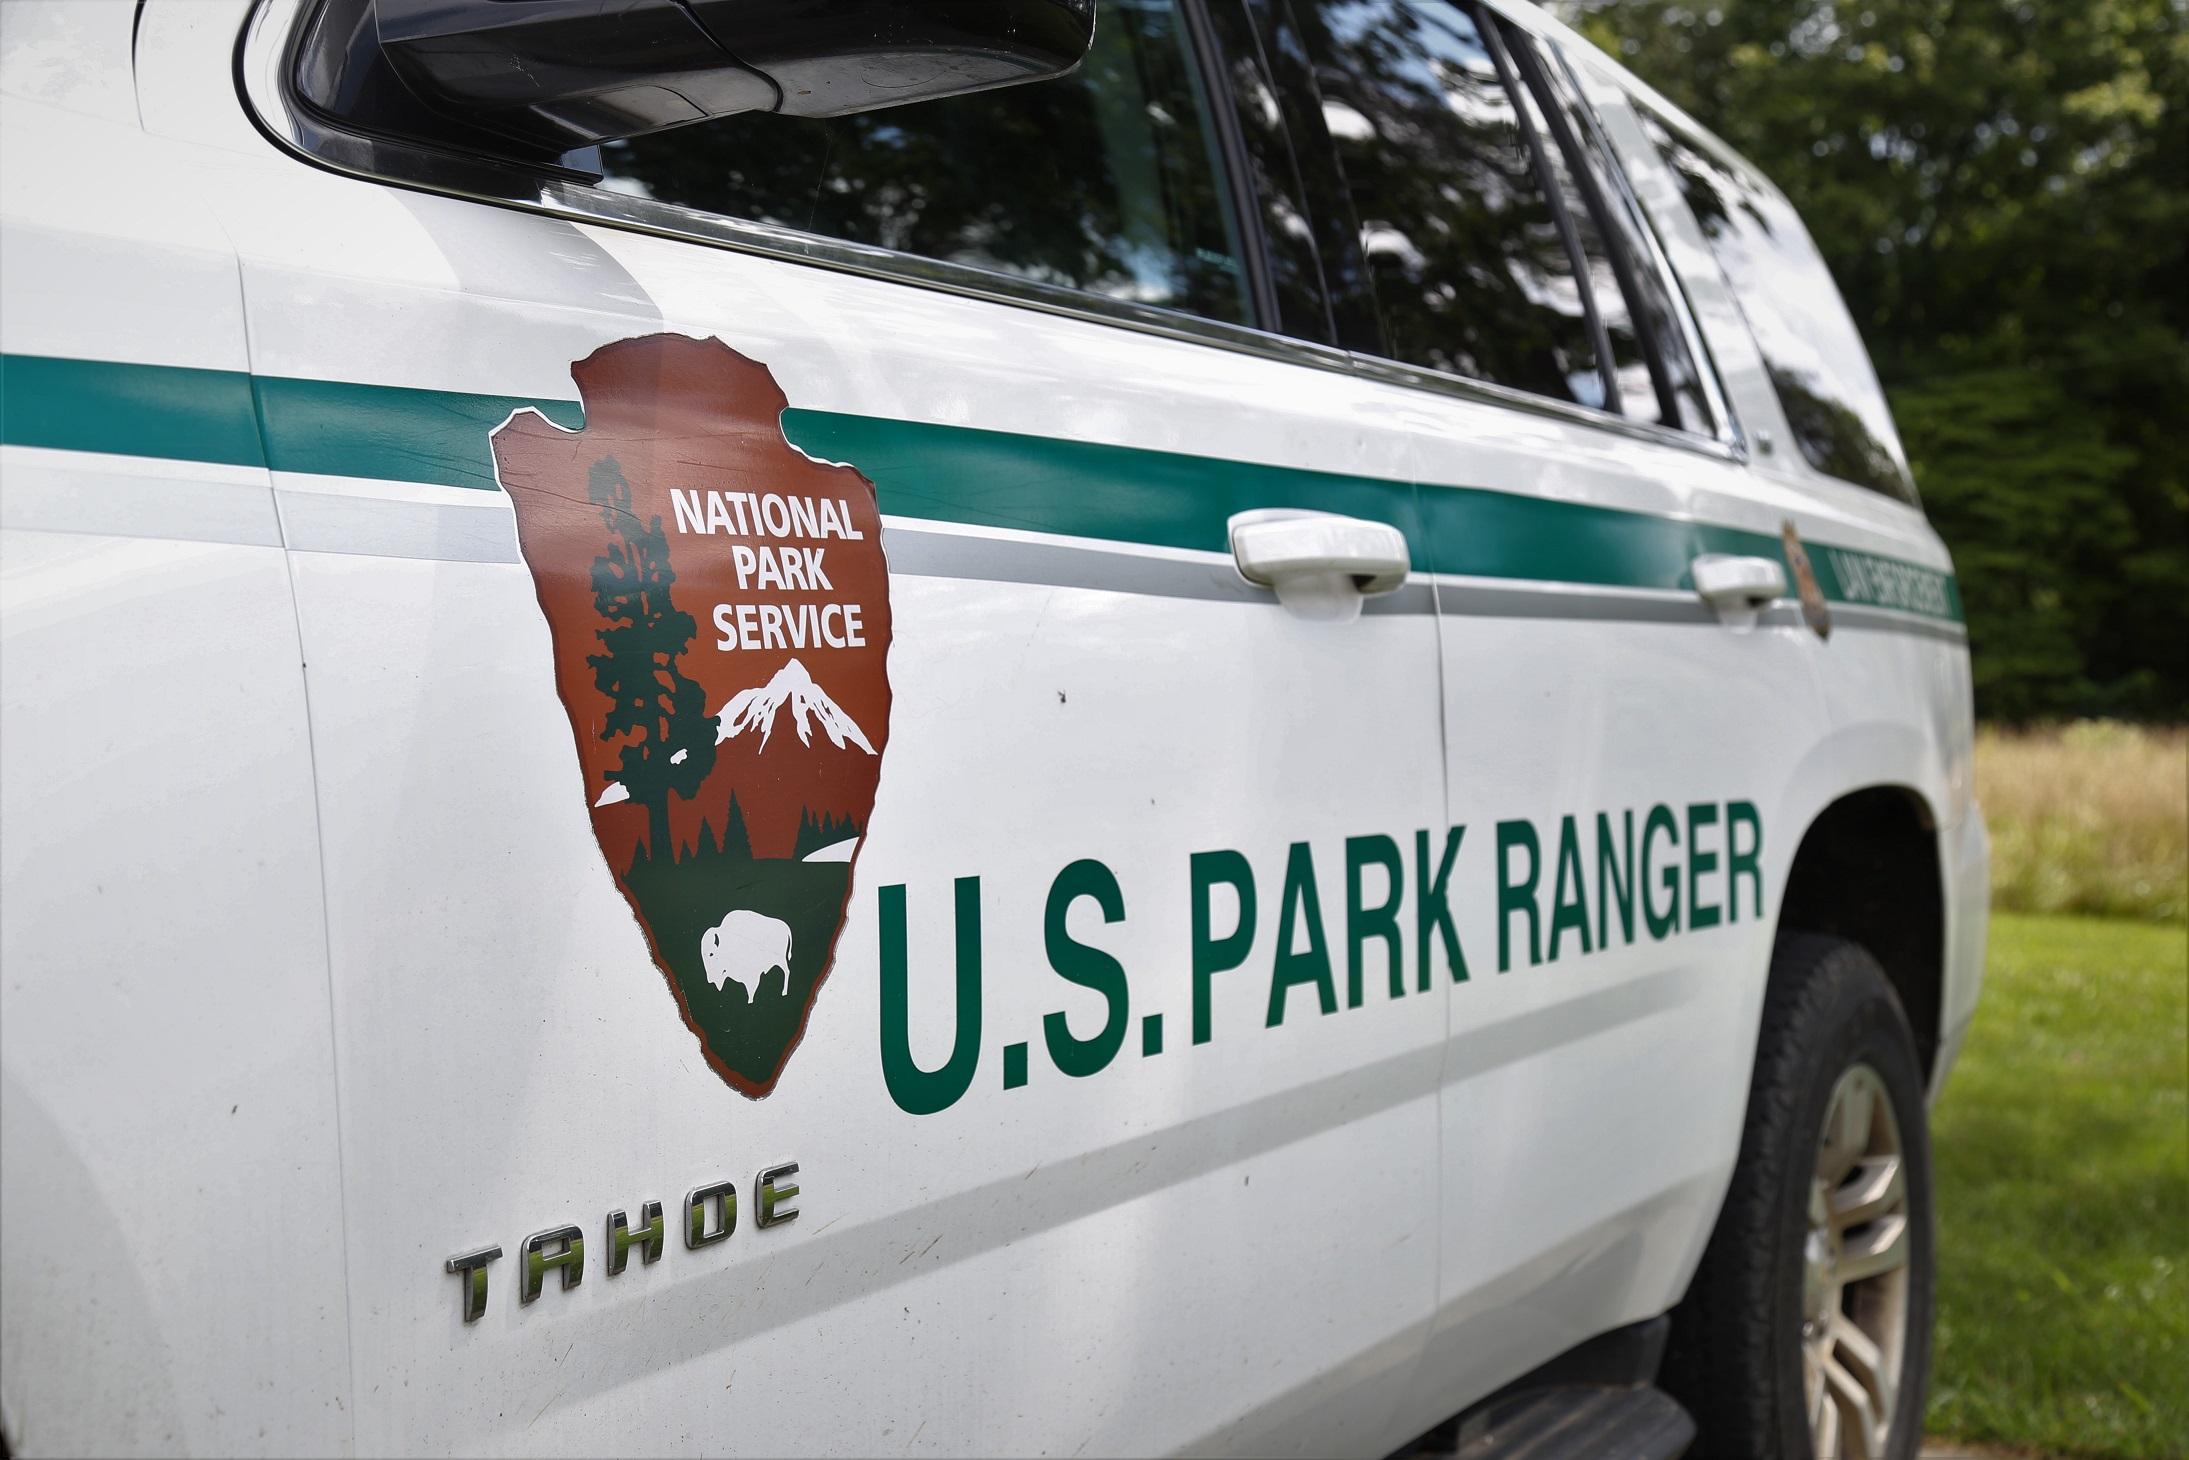 National Park Service Arrowhead Logo and U.S. Park Ranger written on the side of a white SUV.